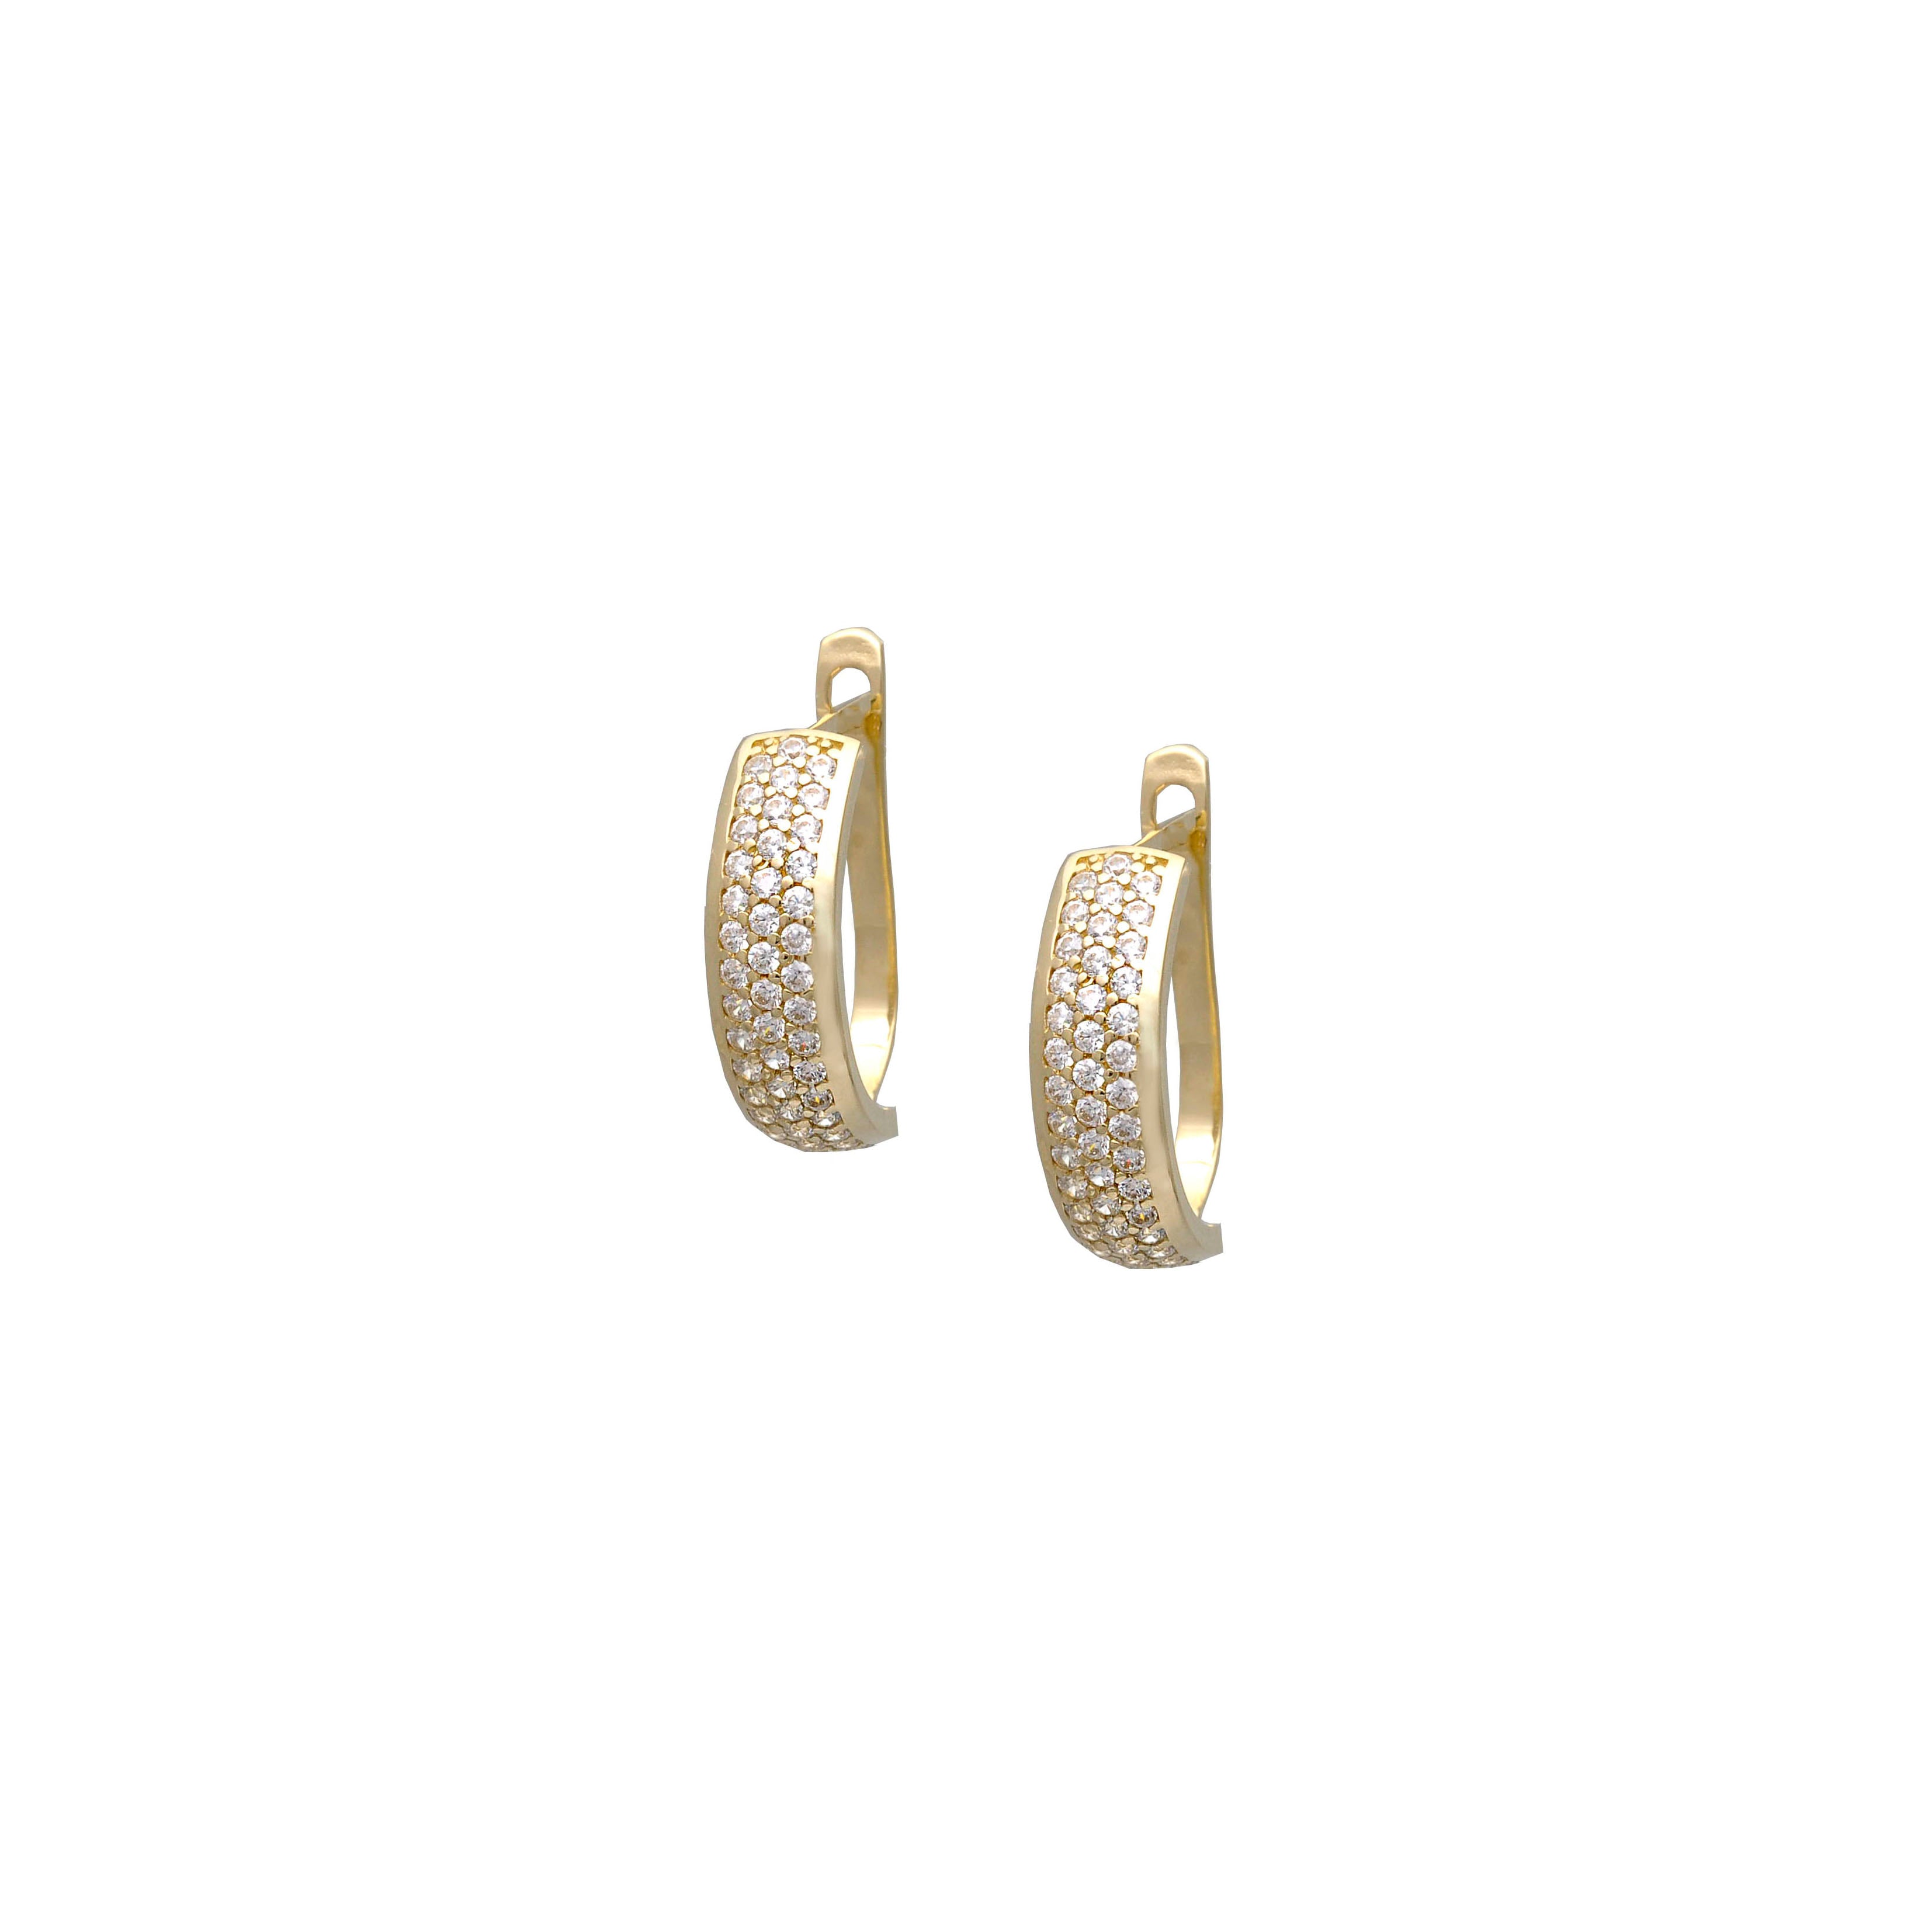 Lever back earrings in 14K yellow gold decorated with diamond-cut zirconium.